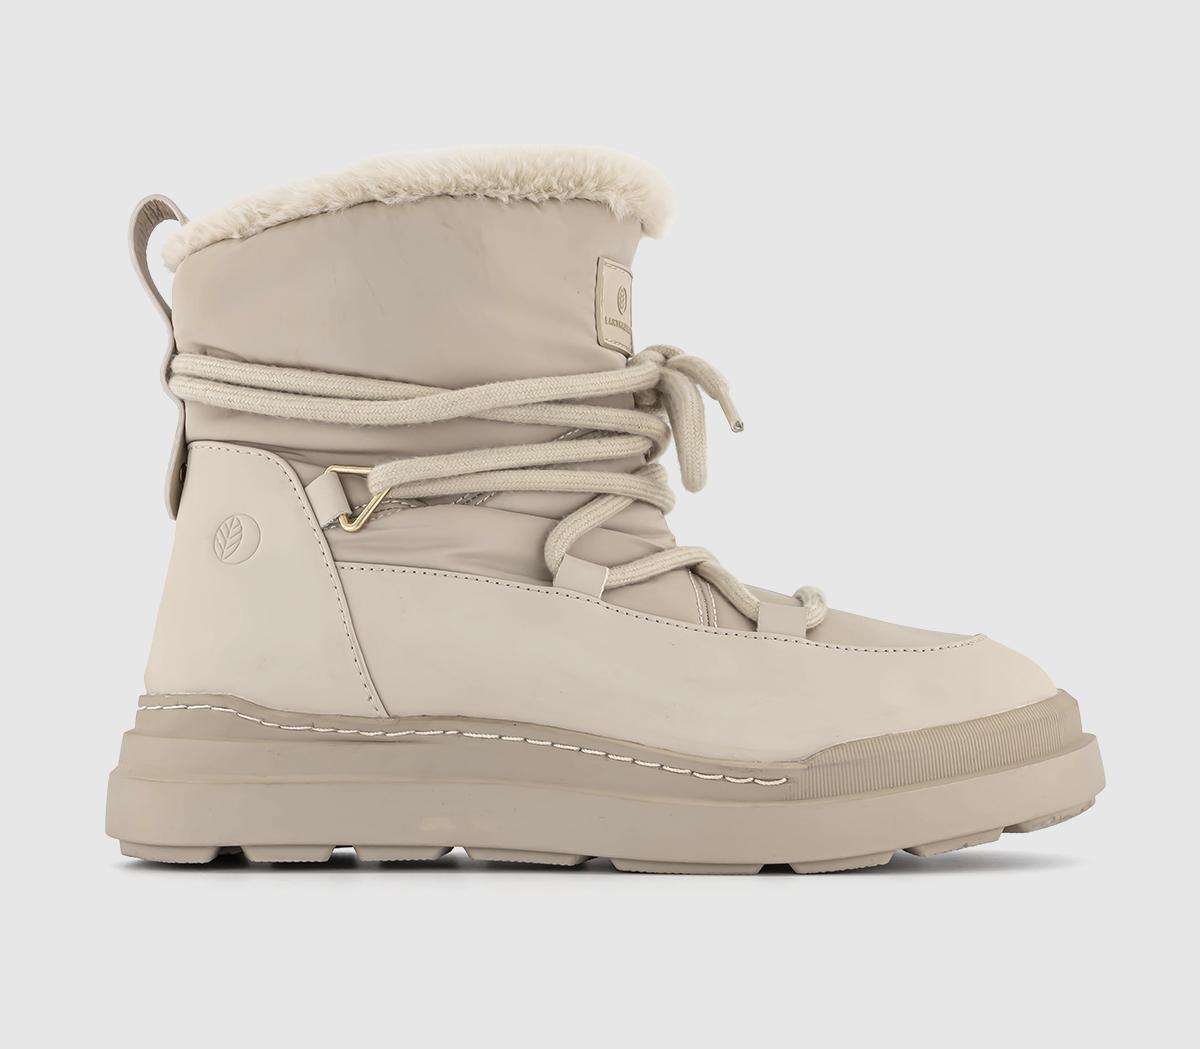 Earth Addict: Eira Warm Lined Snow Boots Beige Natural